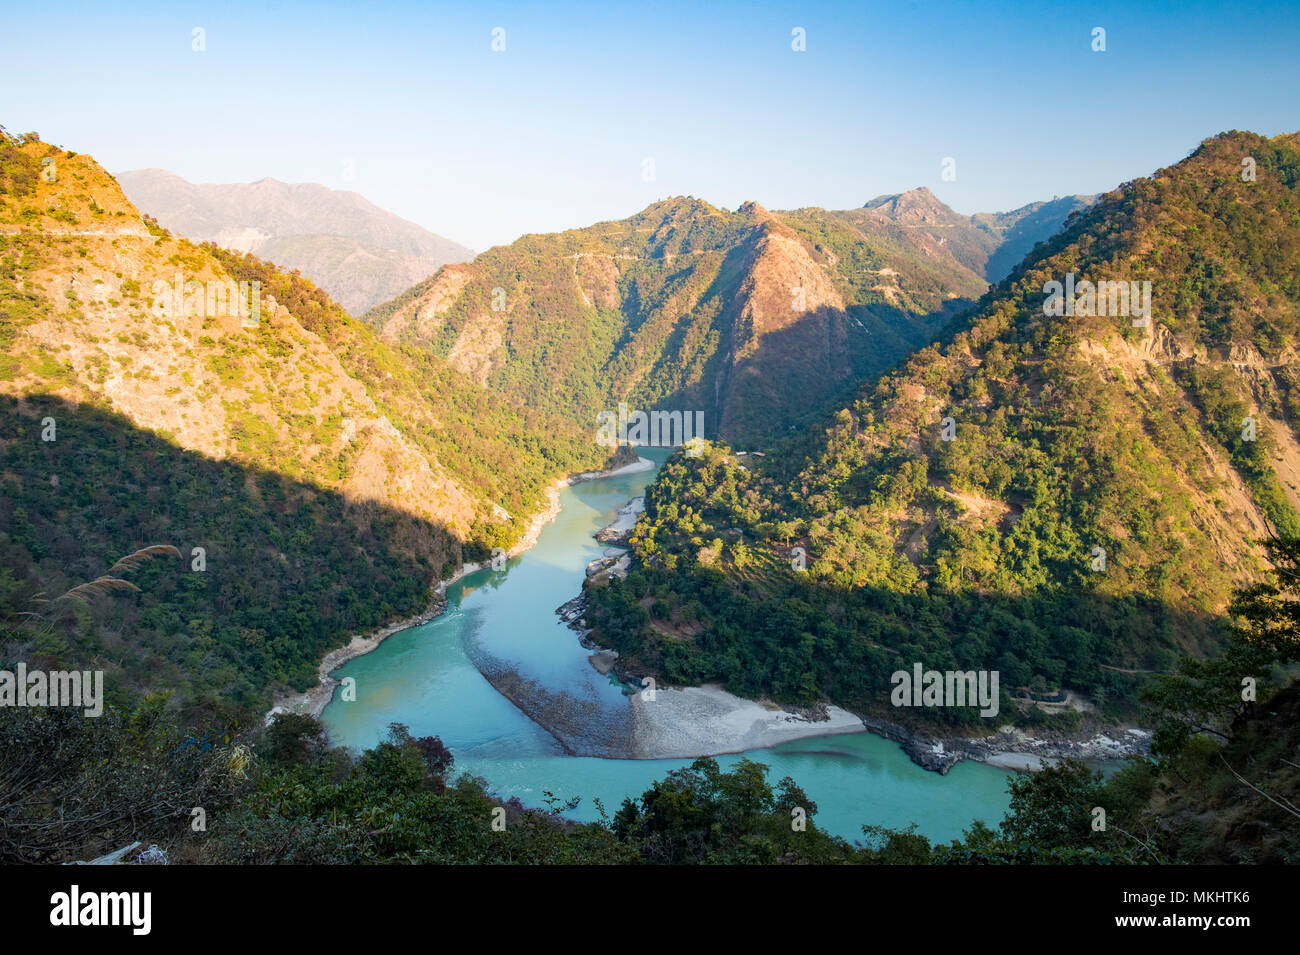 Wonderful green peaks of some mountains with the Ganges river flowing between them in Rishikesh, India Stock Photo